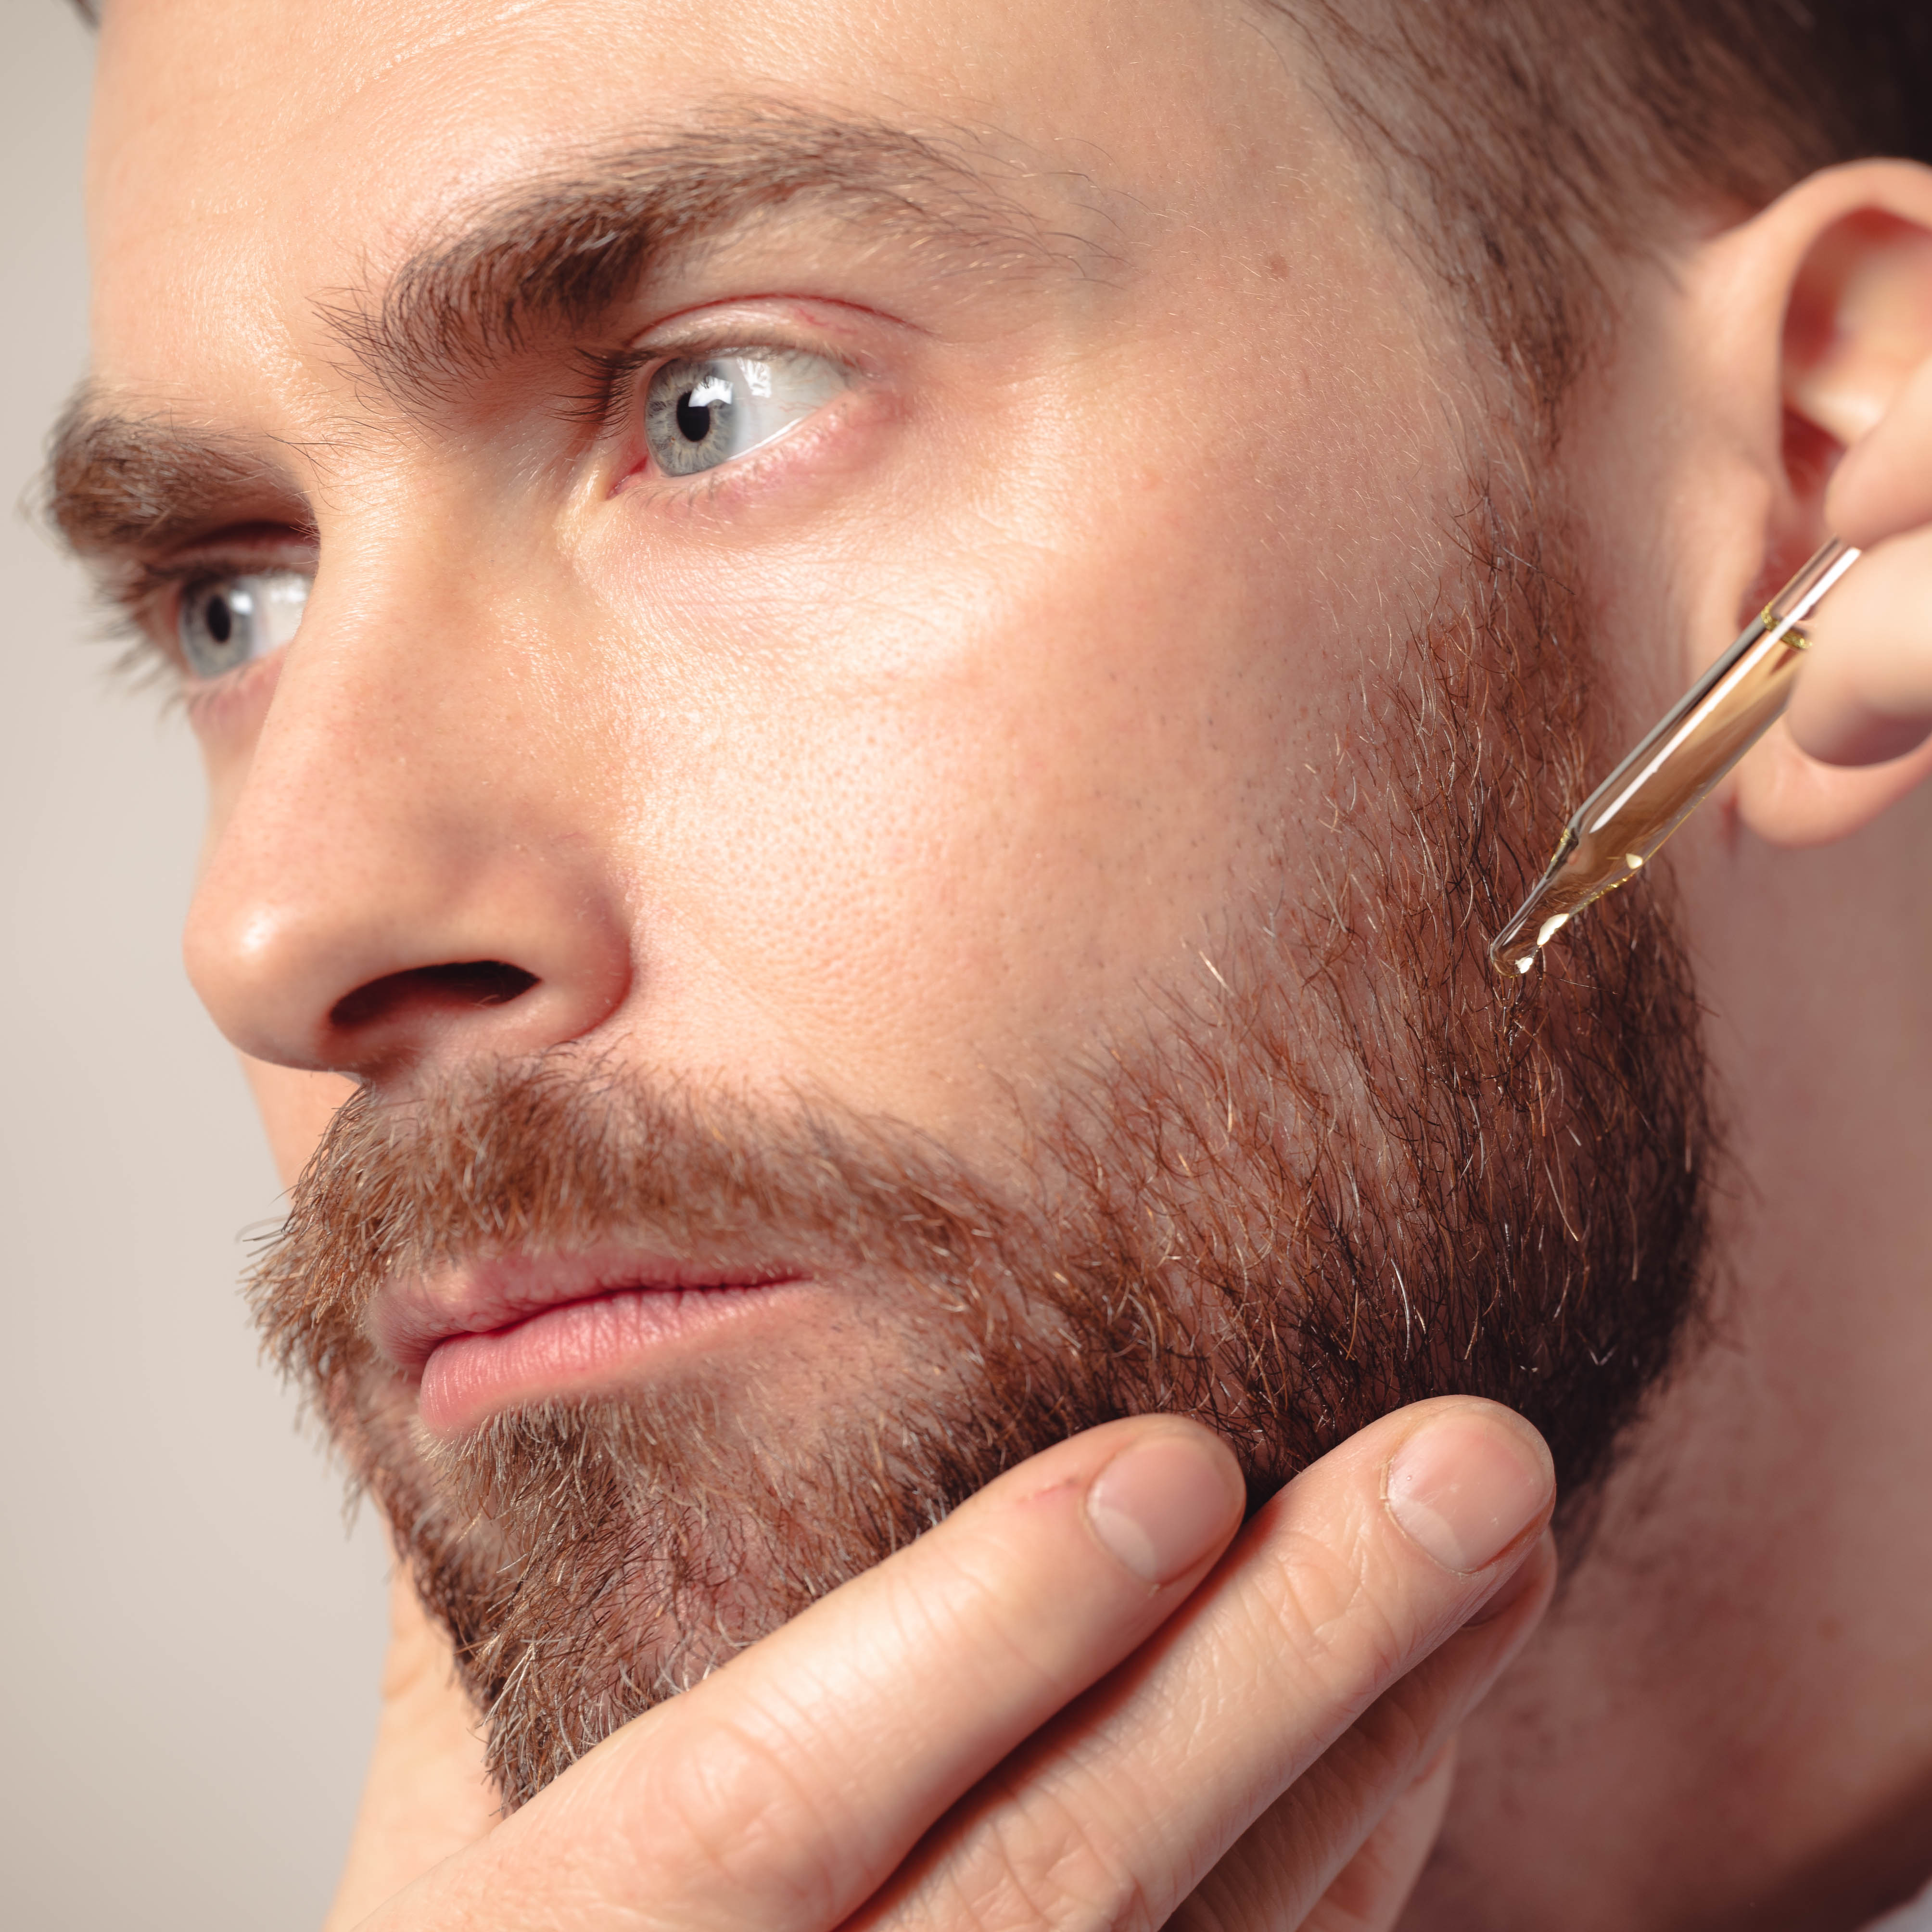 John applies a vial of Beard Oil directly to the whiskers on his cheek.